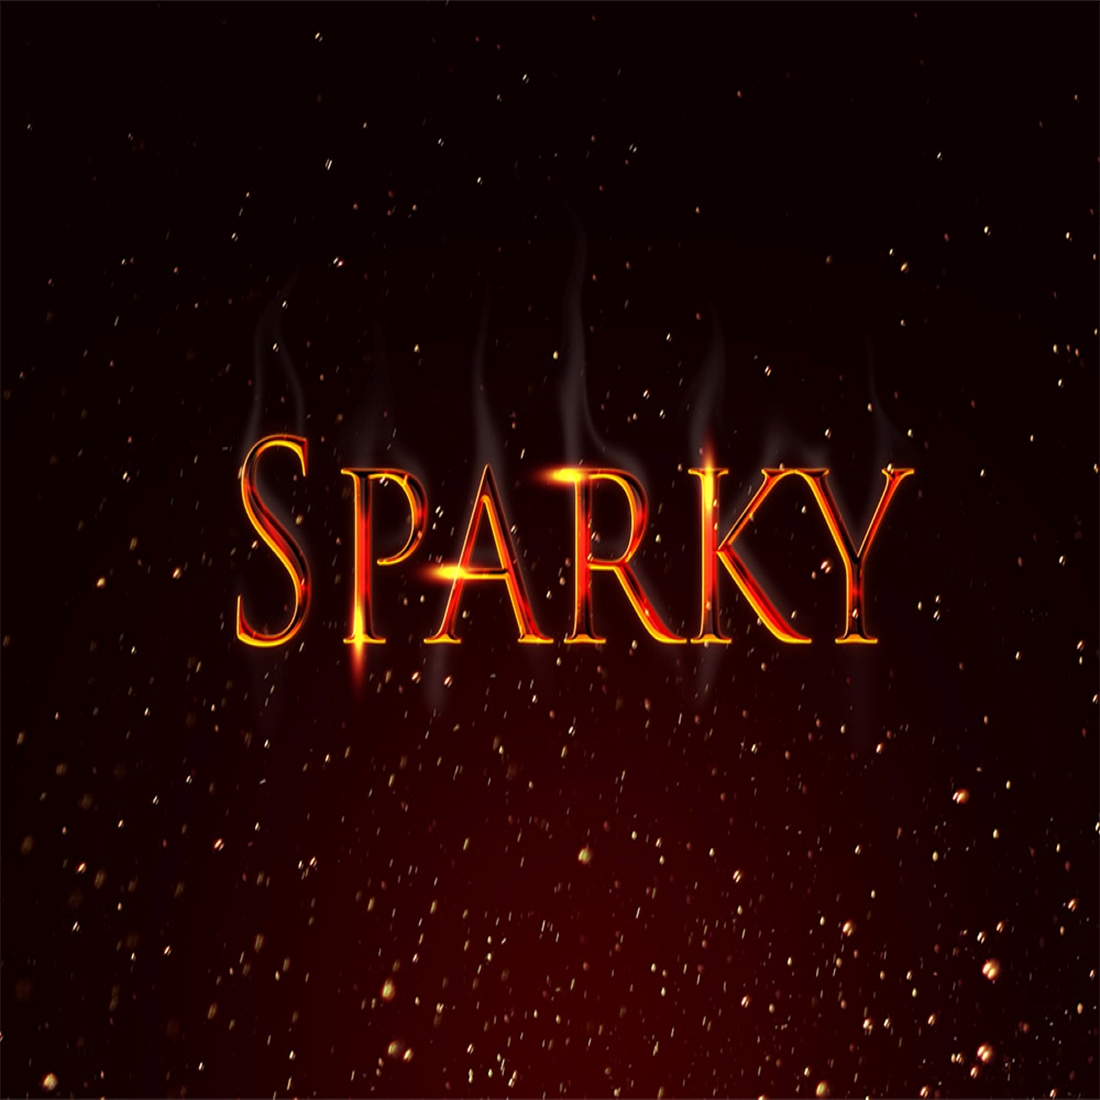 Sparky Text Effect preview image.